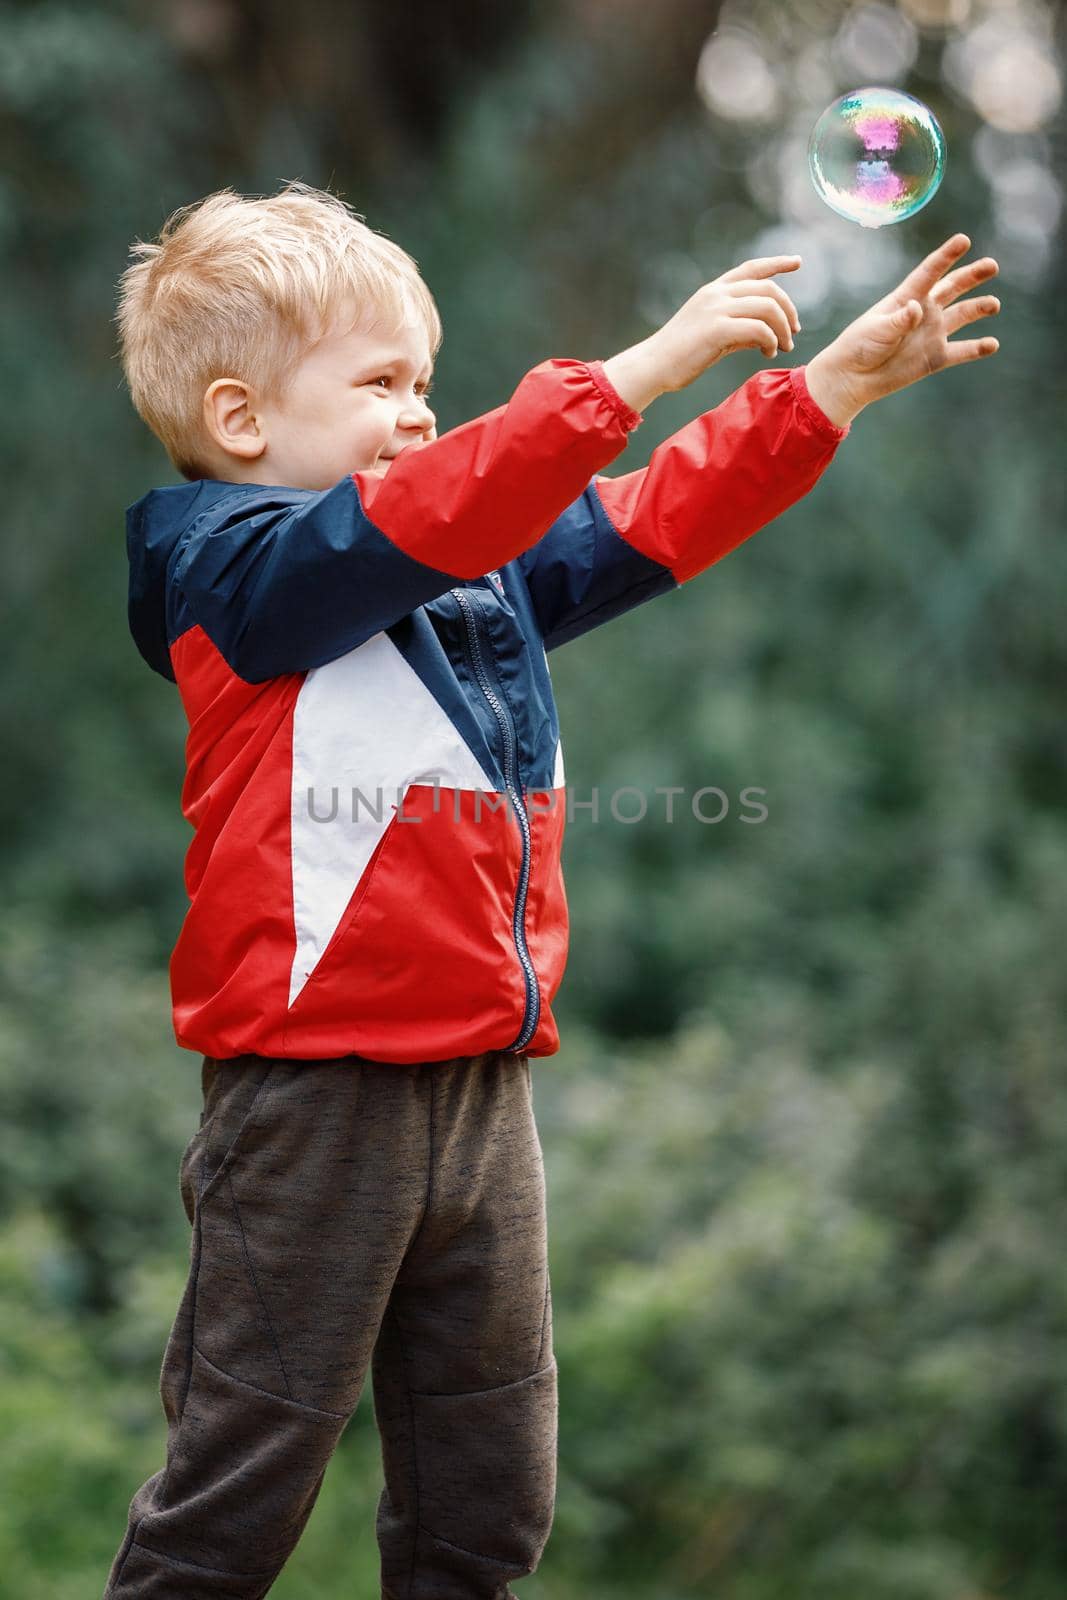 Very happy kid trying to catch soap bubble by Lincikas